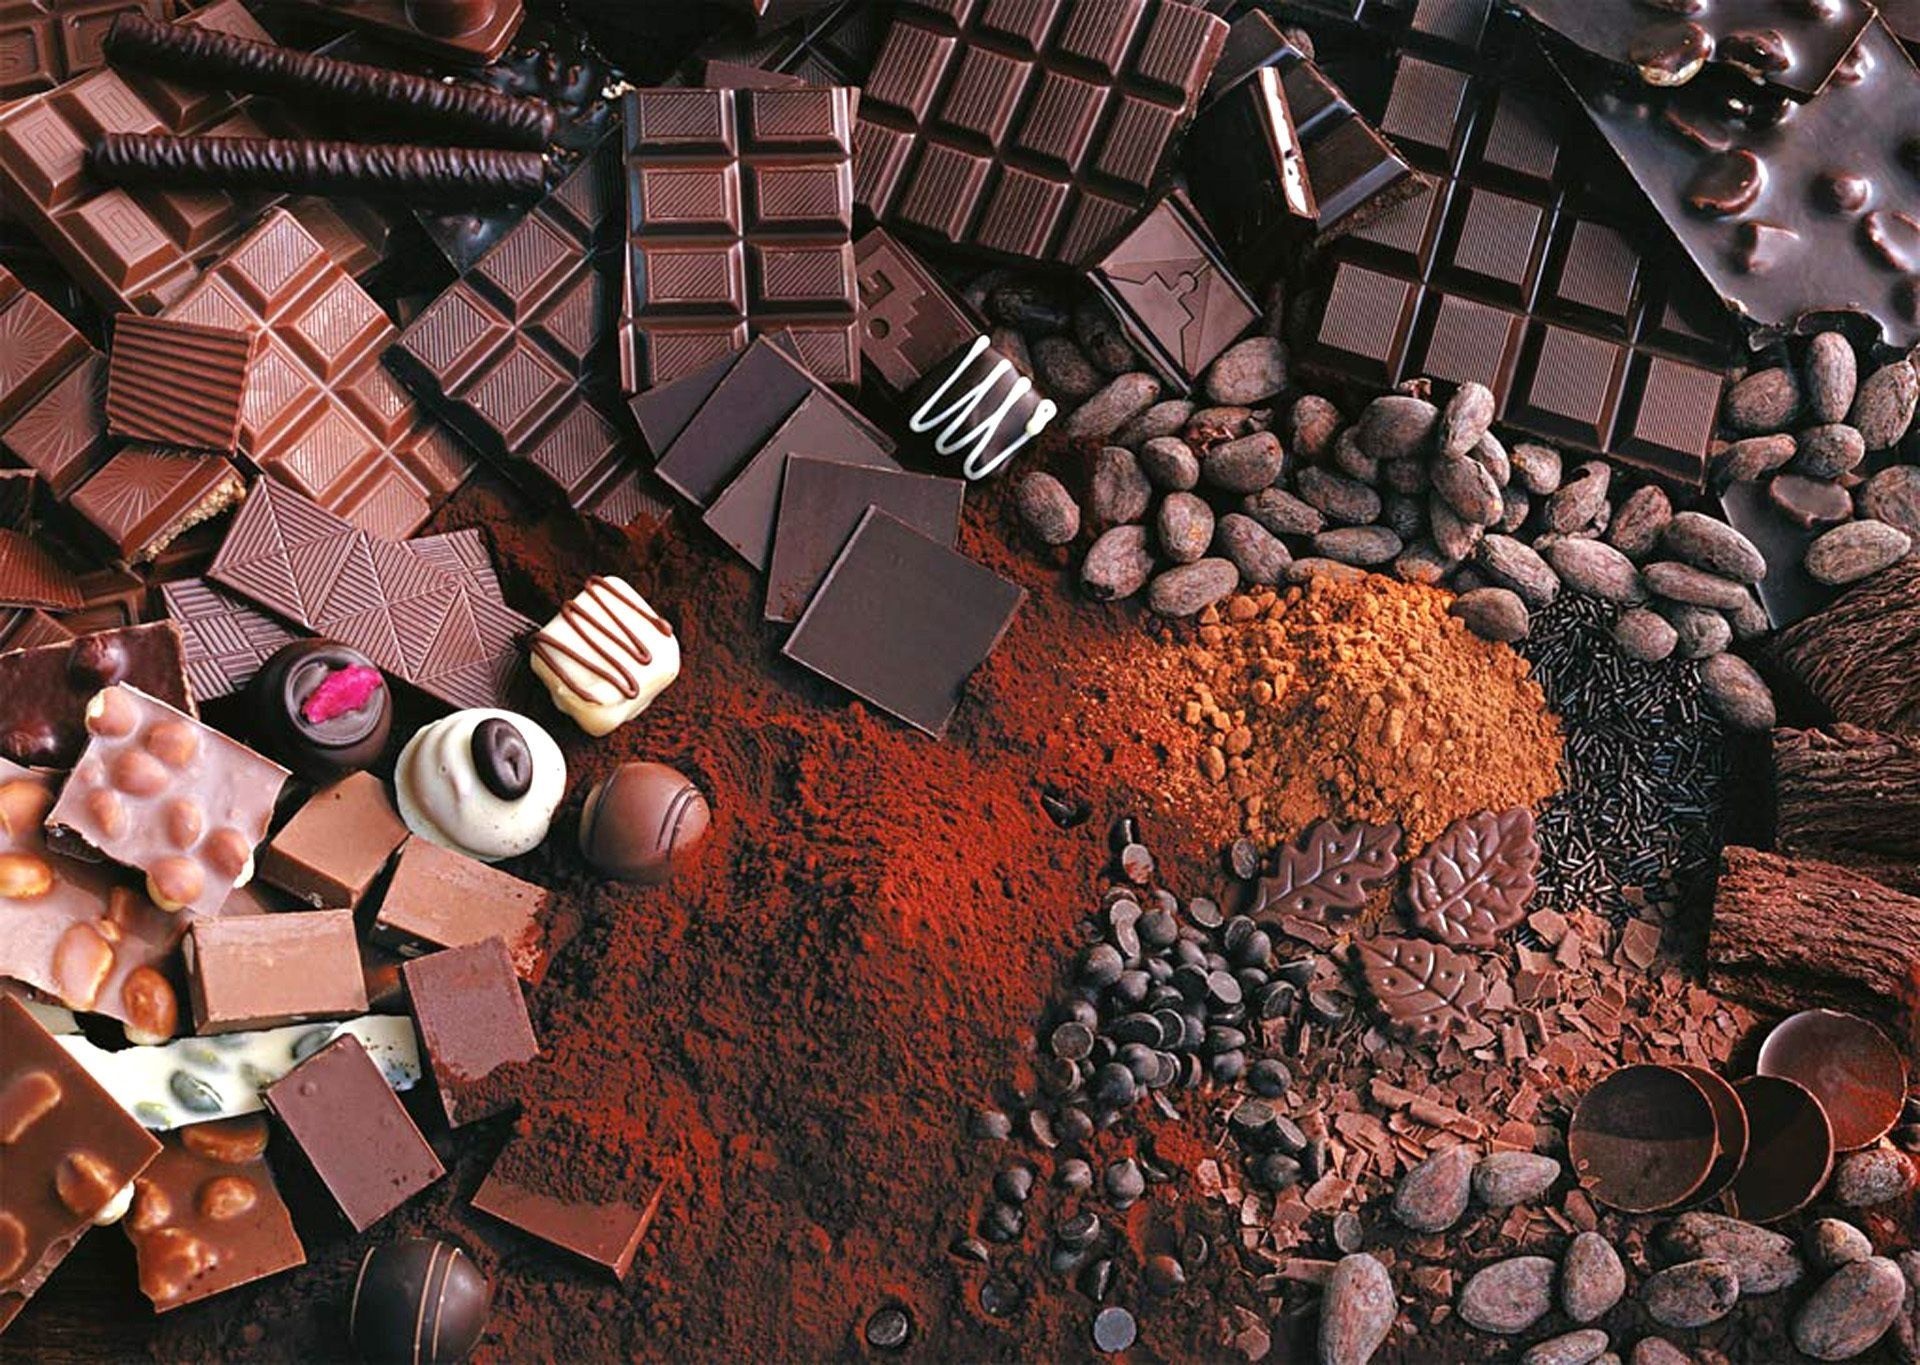 Cocoa wallpapers, Stunning backgrounds, Cocoa inspiration, Luscious cocoa visuals, 1920x1370 HD Desktop